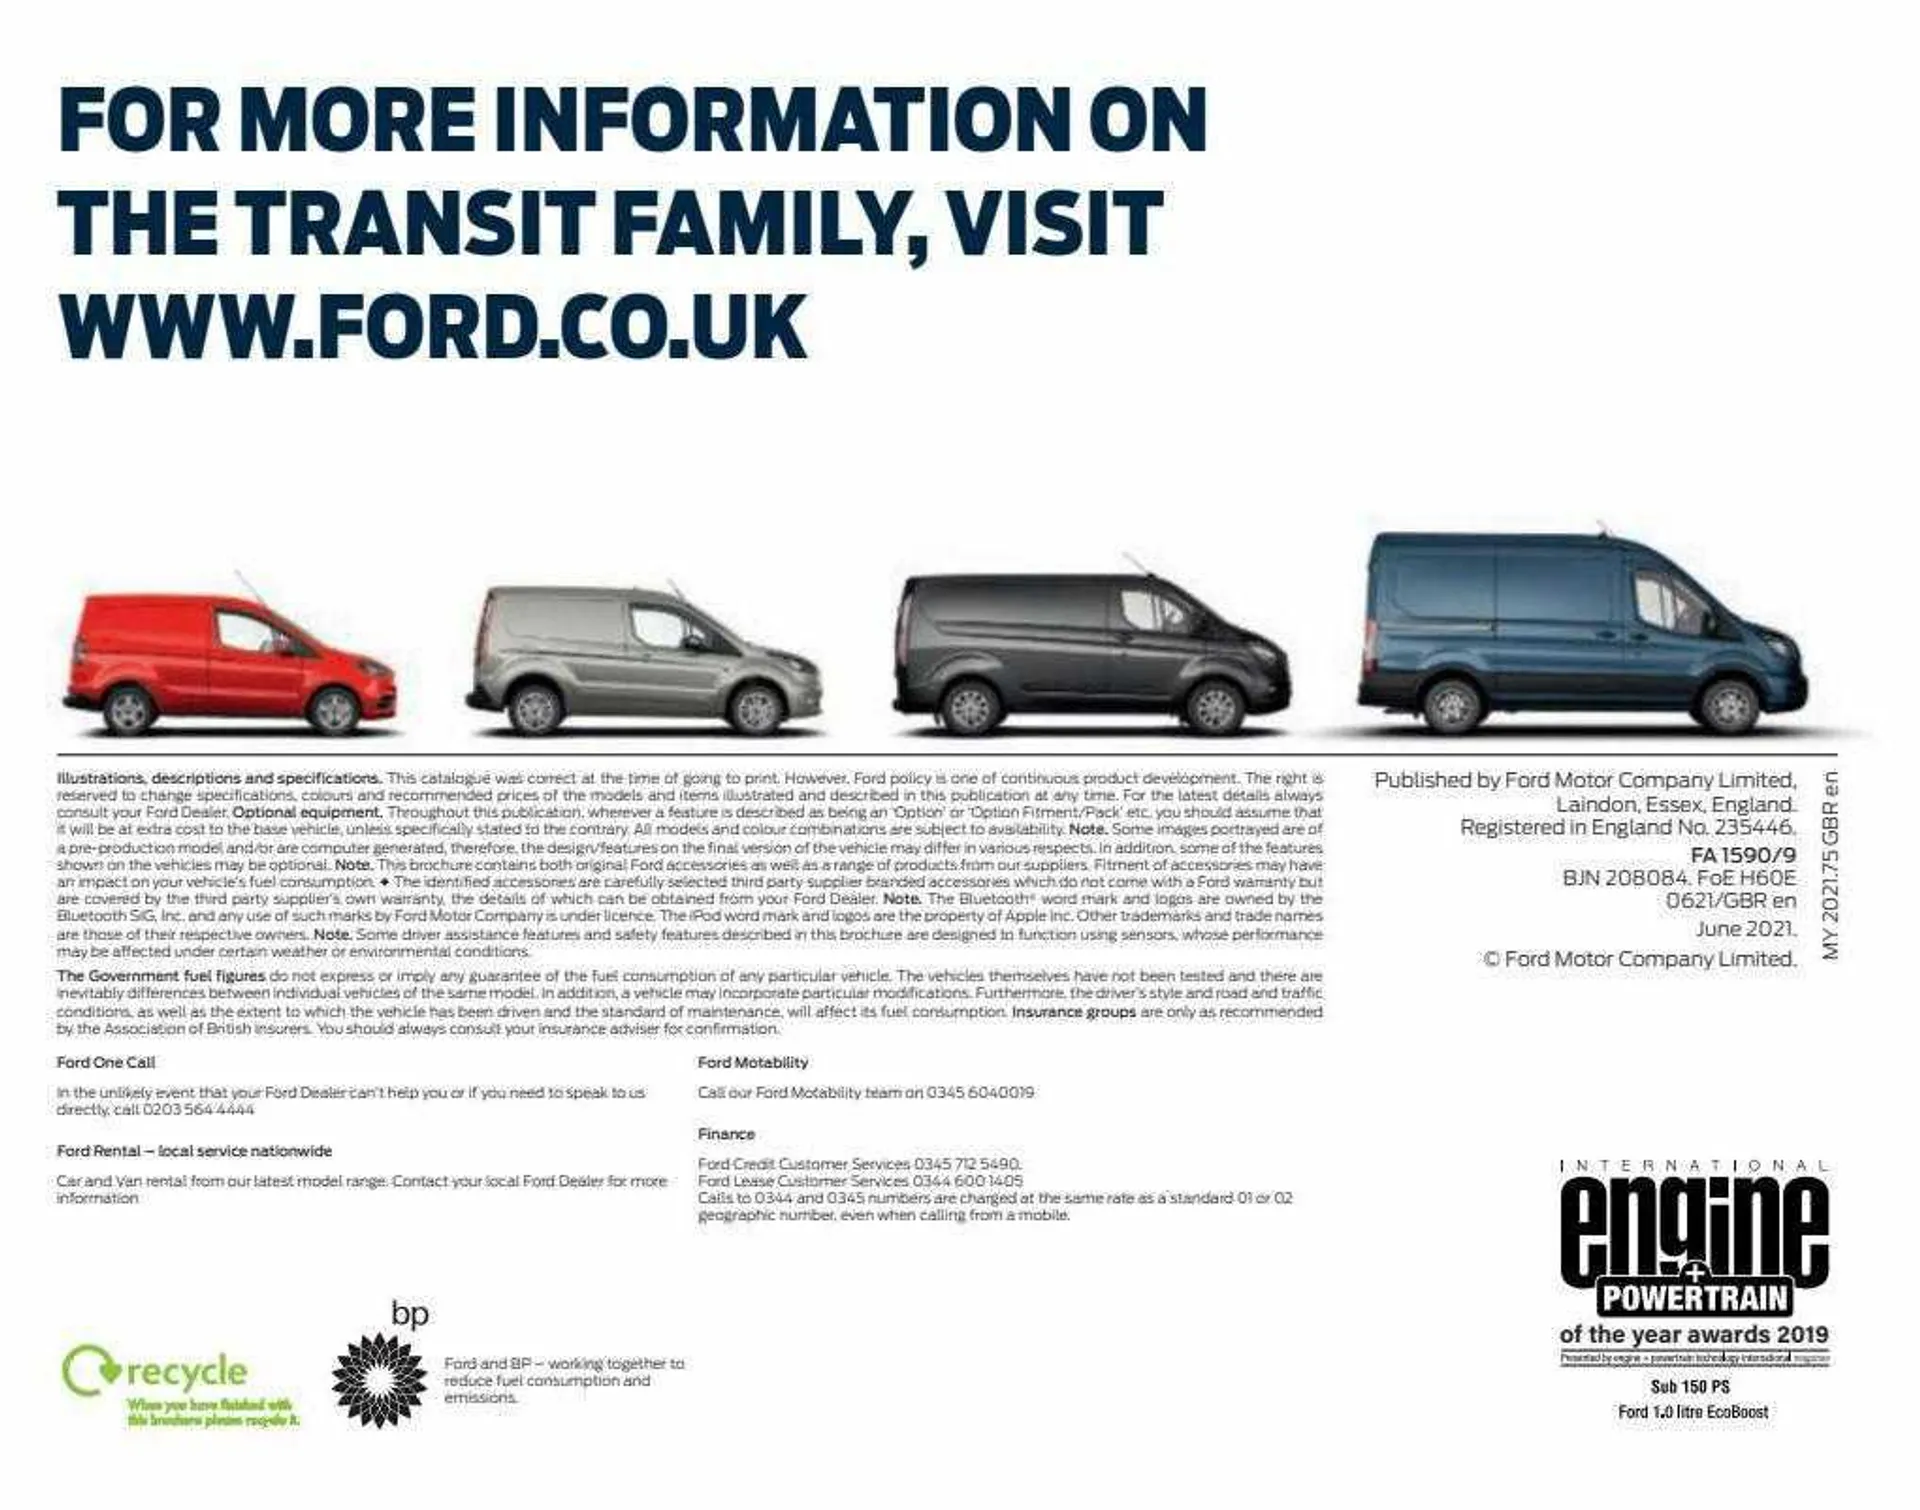 Ford Weekly Offers - 79